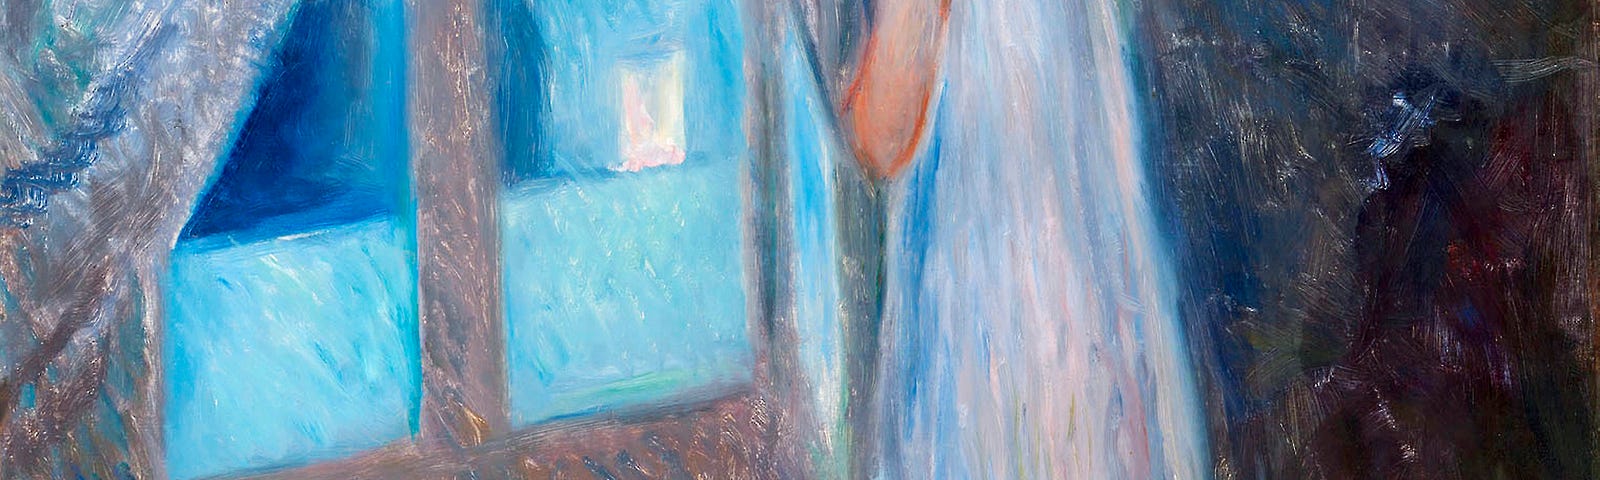 Impressionisitc paiting of woman in white gown at window casting blue evening light into dark room.